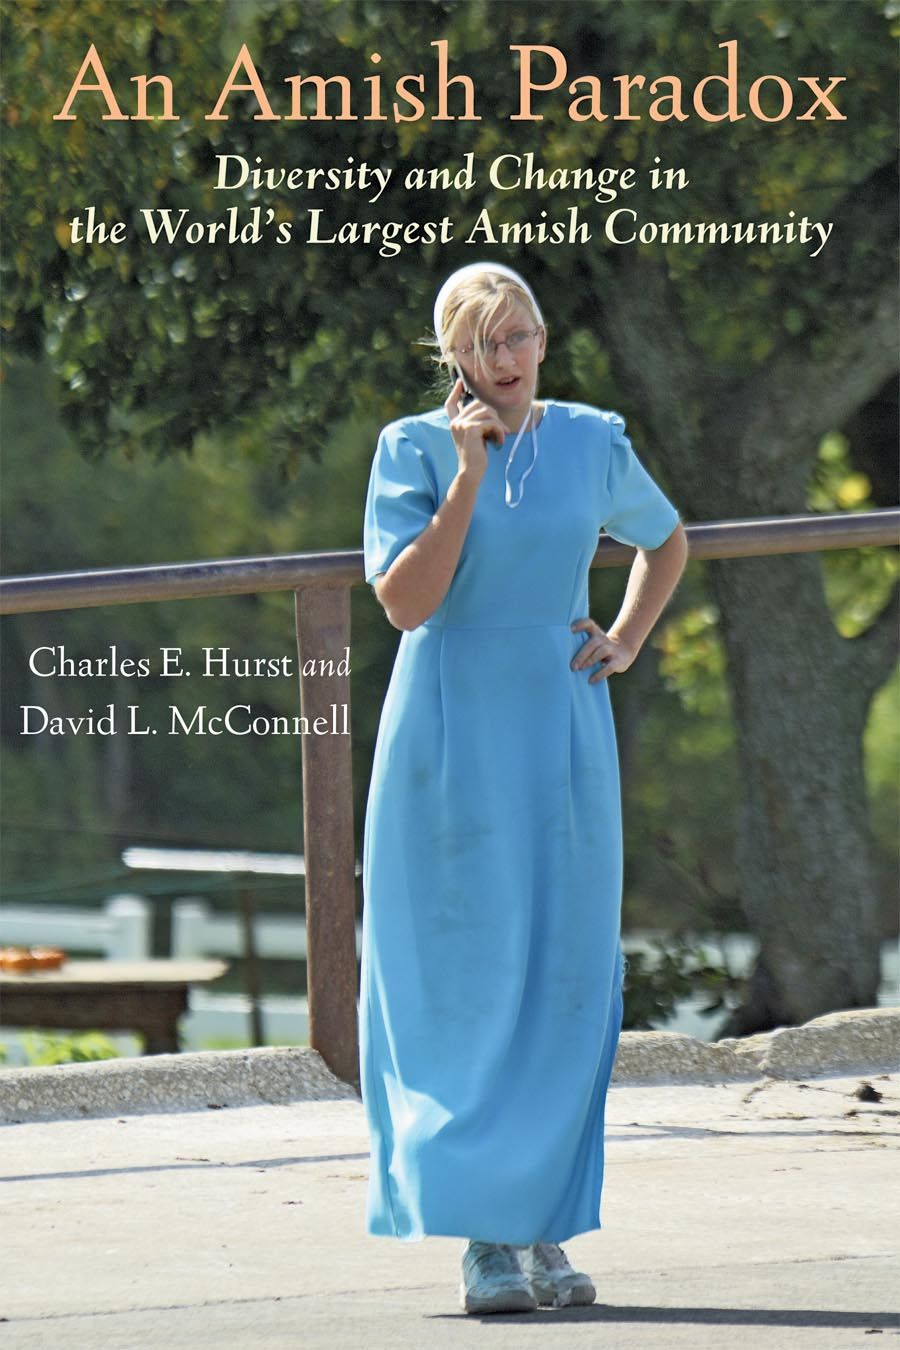 Скачать книгу "An Amish Paradox – Diversity and Change in the World?s Largest Amish Community"